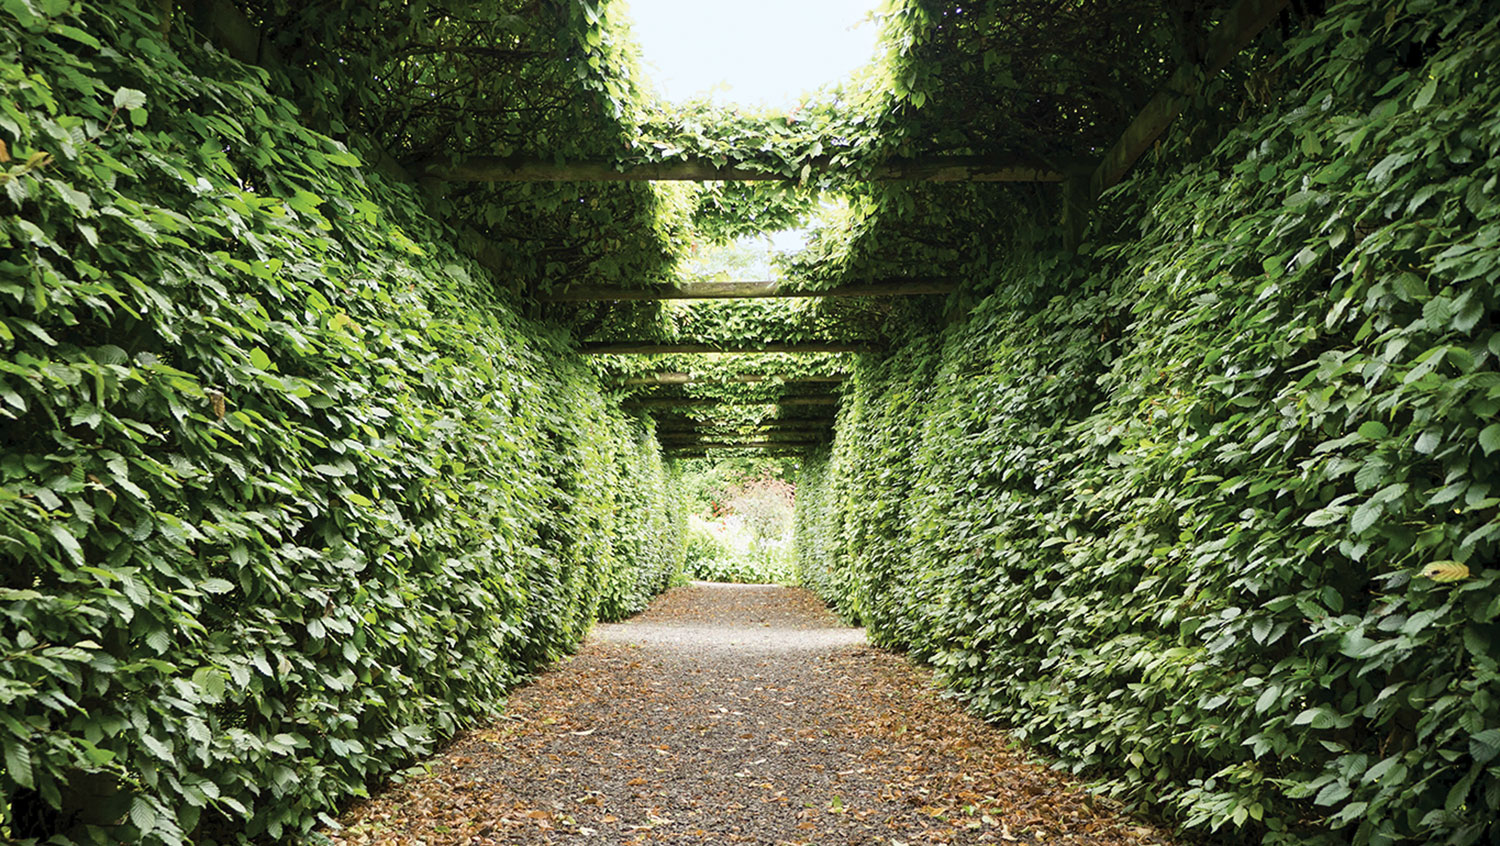 Photo of a path in an Irish garden lined on either side by high walls of densely planted hornbeam, which also grows over beams above to form a tunnel